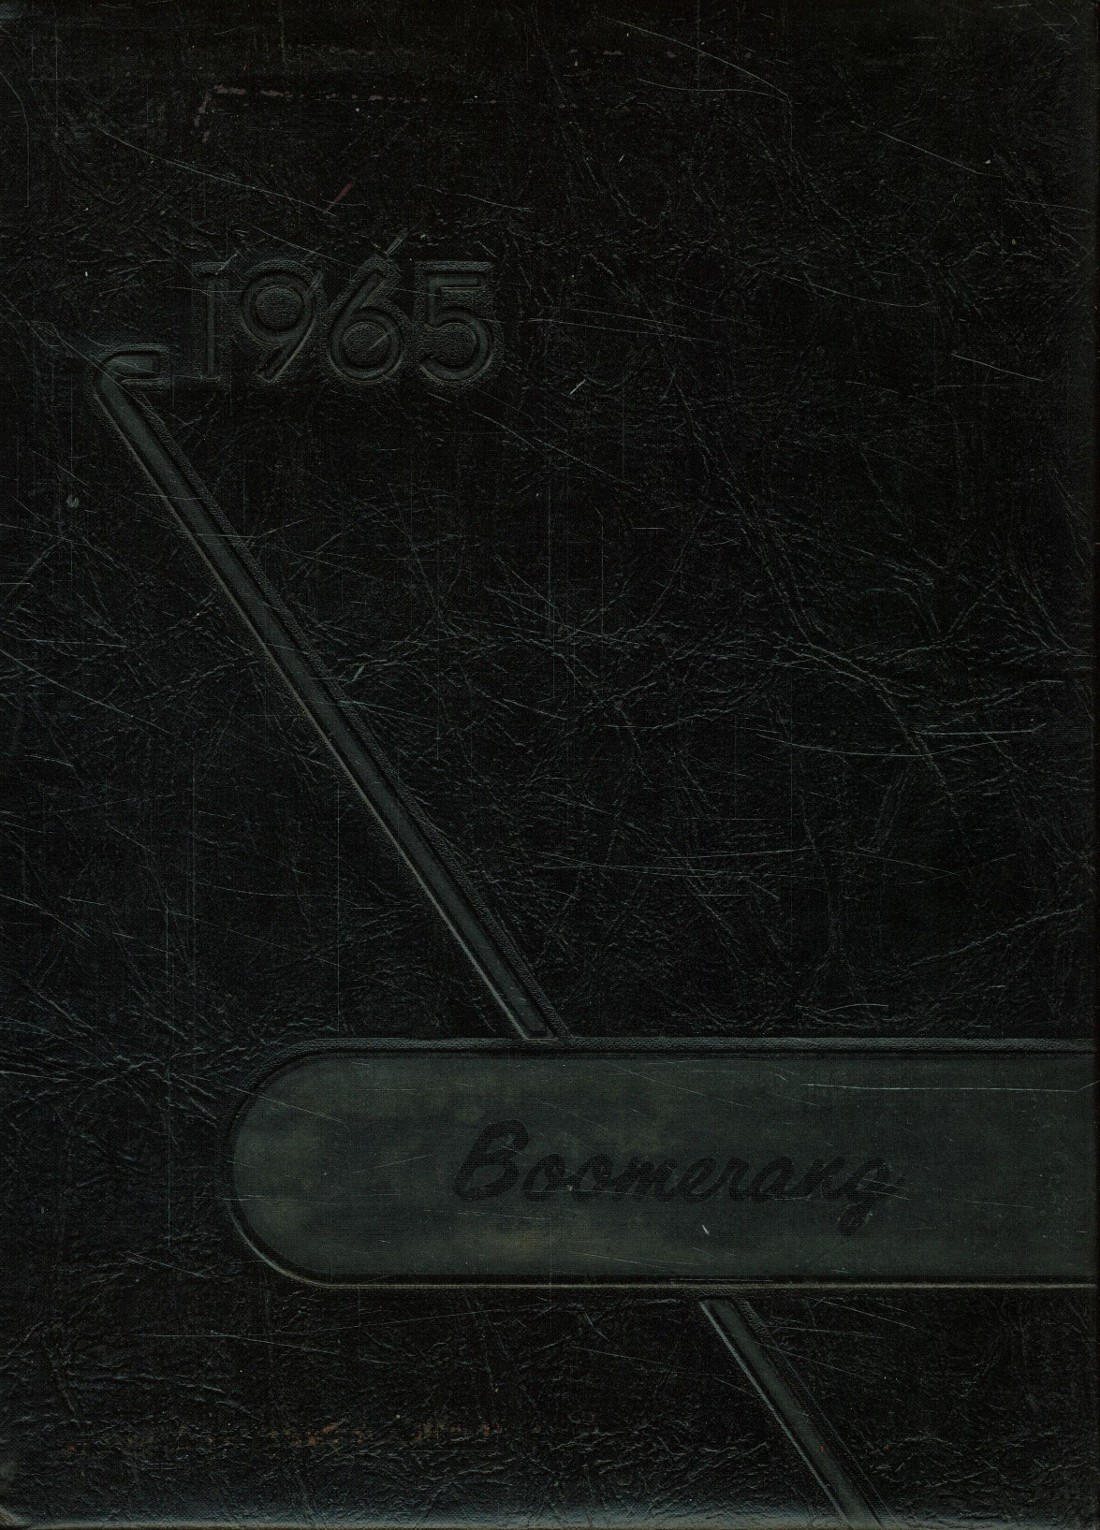 1965 yearbook from Avon High School from Avon, Illinois for sale